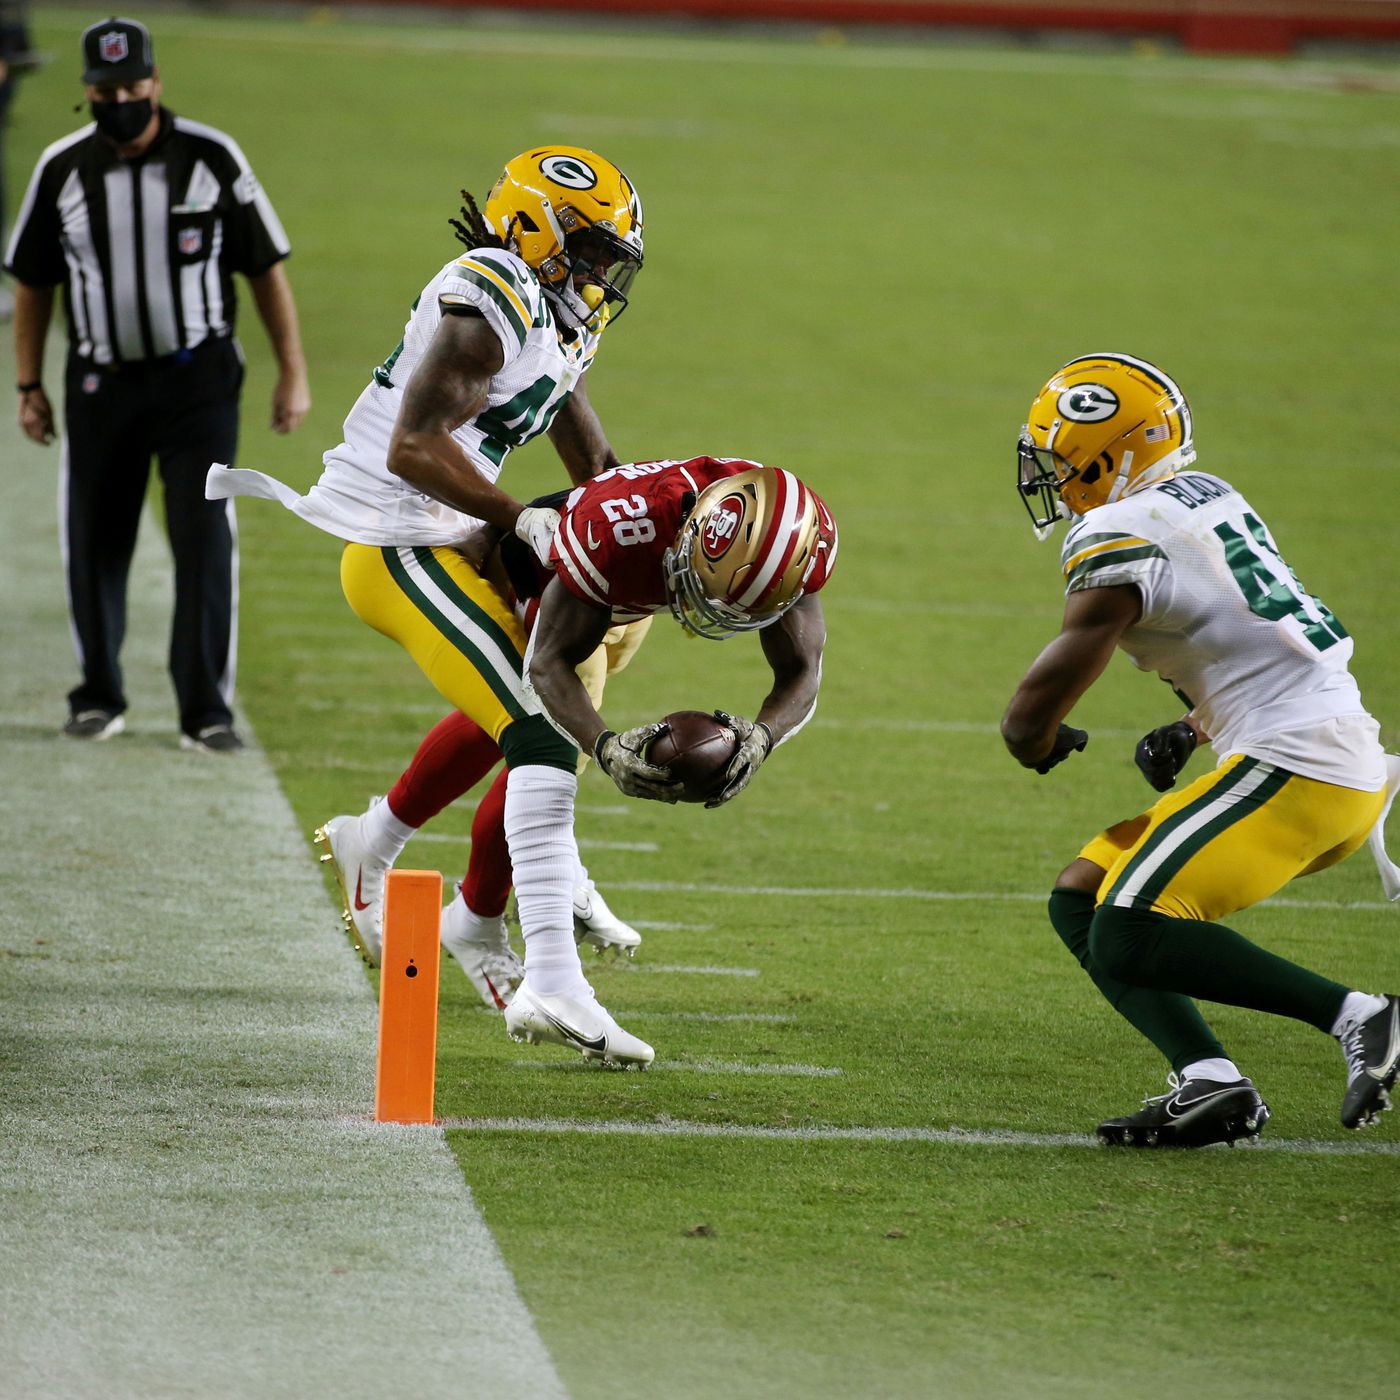 green bay 49ers game live